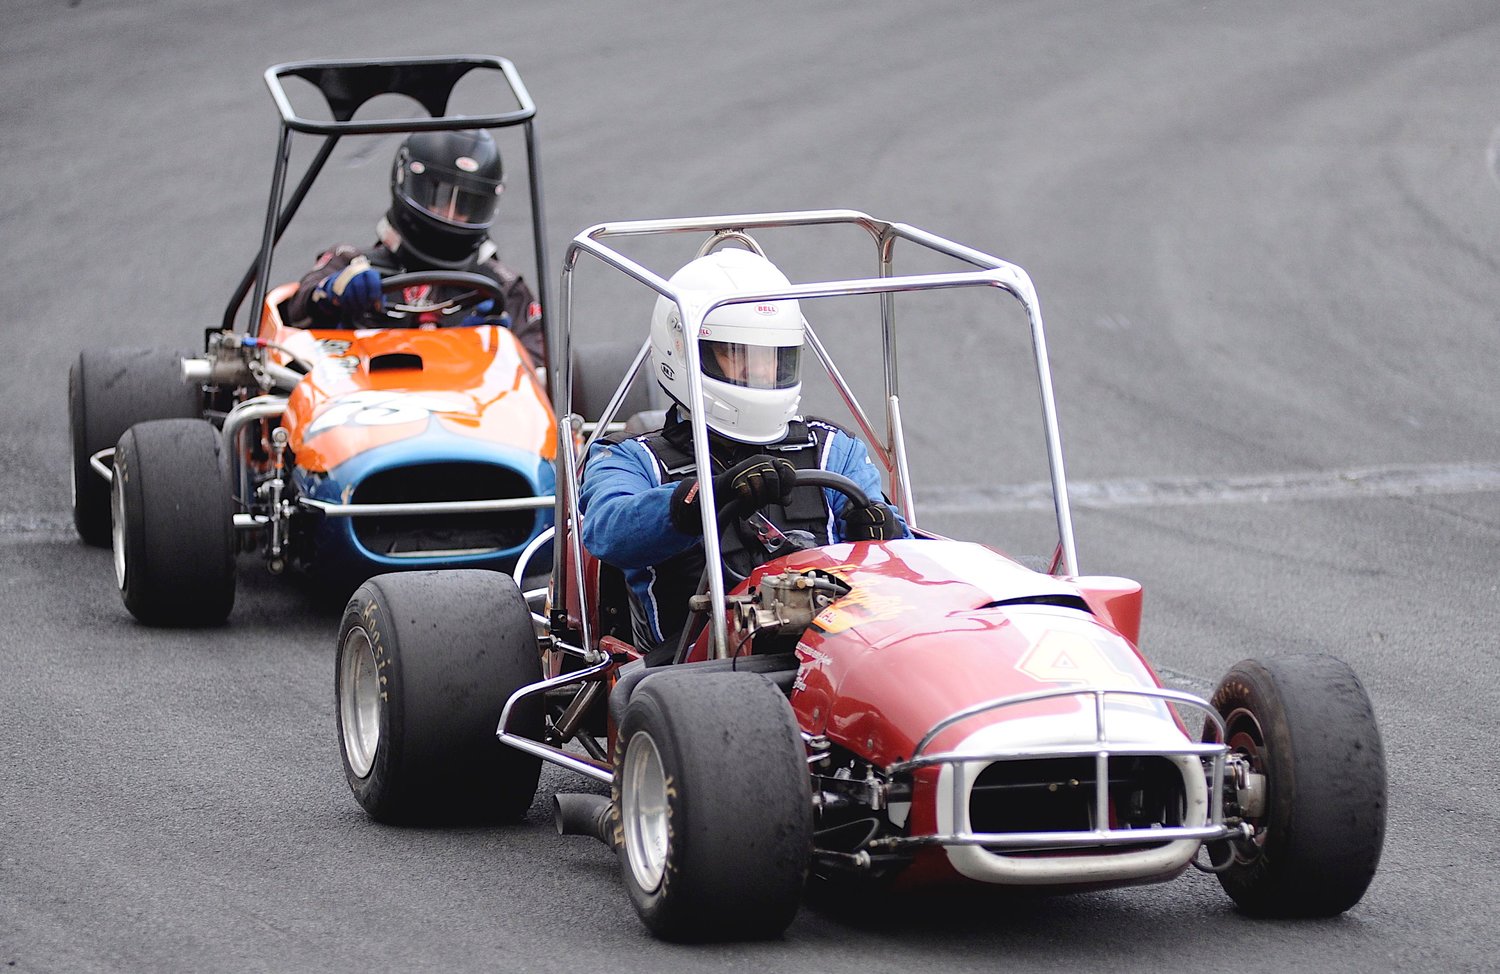 Vintage iron. Keith Majka, president of the Atlantic Coast Old Timers (ACOT), showed up on race day with a contingent of fellow owner/drivers of vintage TQ Midgets. He is pictured on the oval with Mike Casario, who later placed second in the feature.